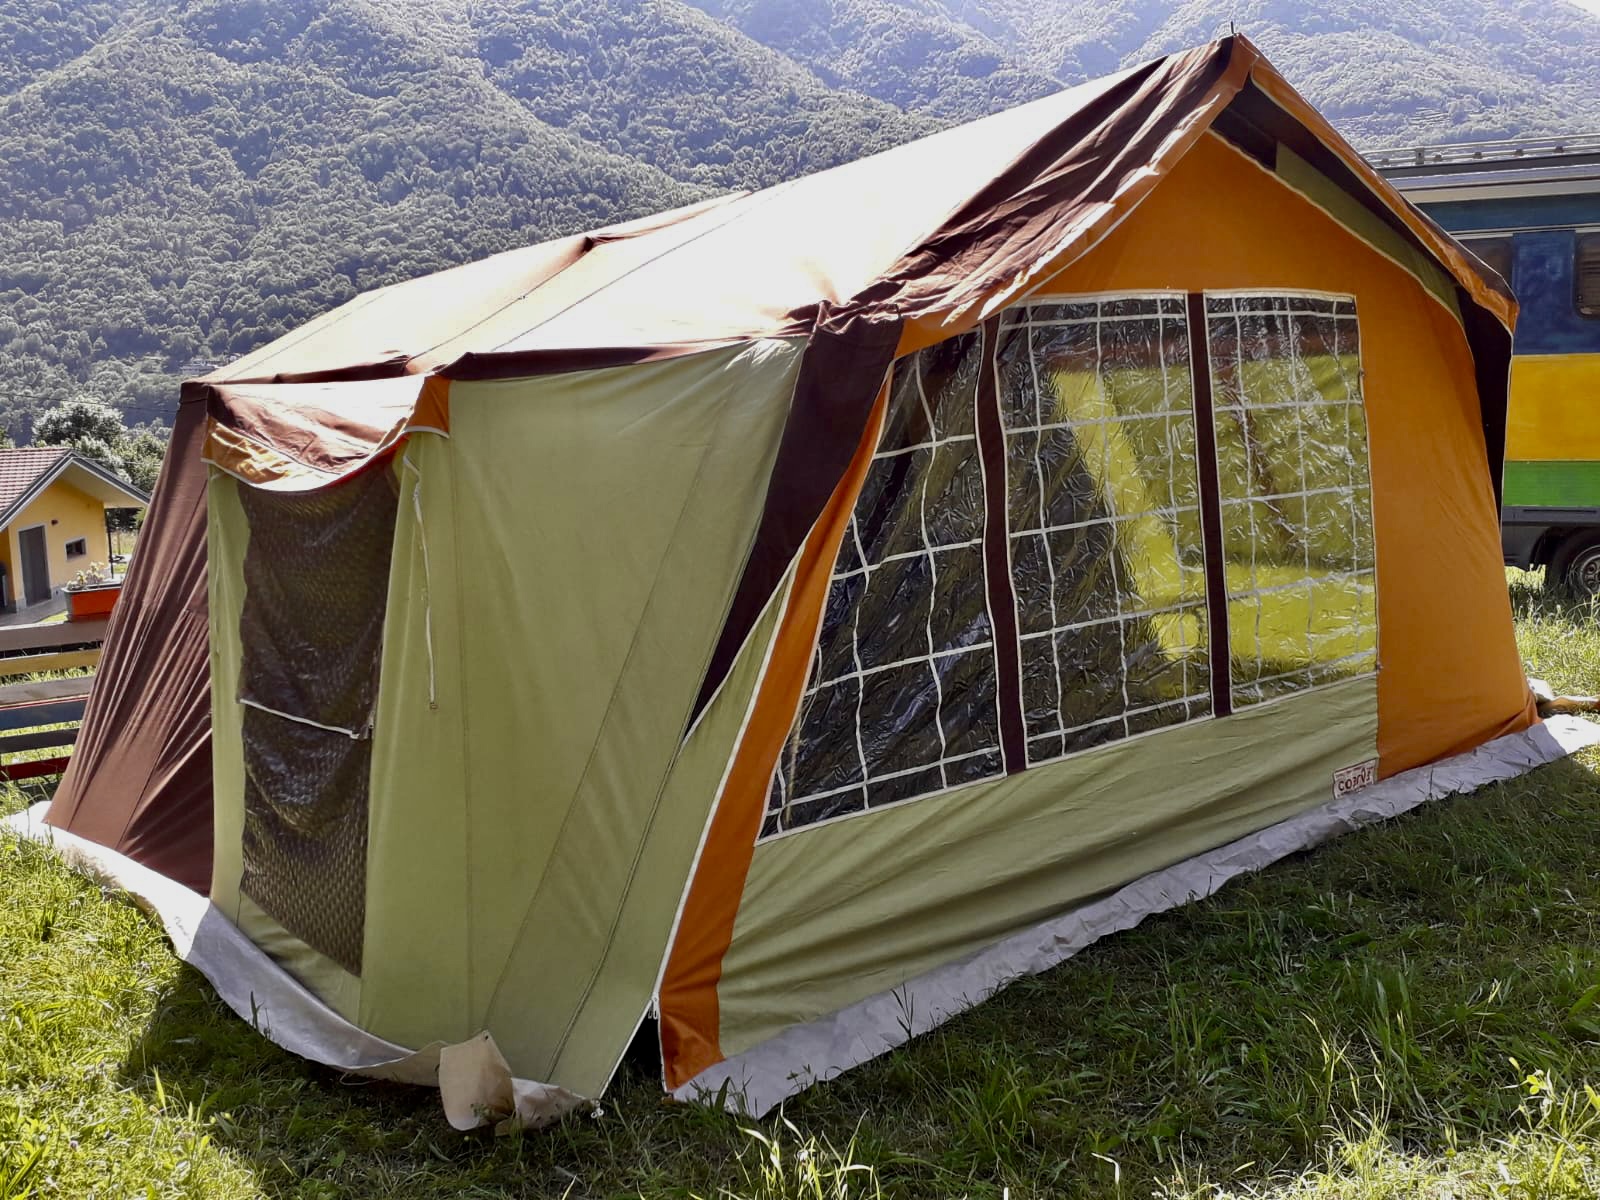 Natural 70s tent in the province of Turin